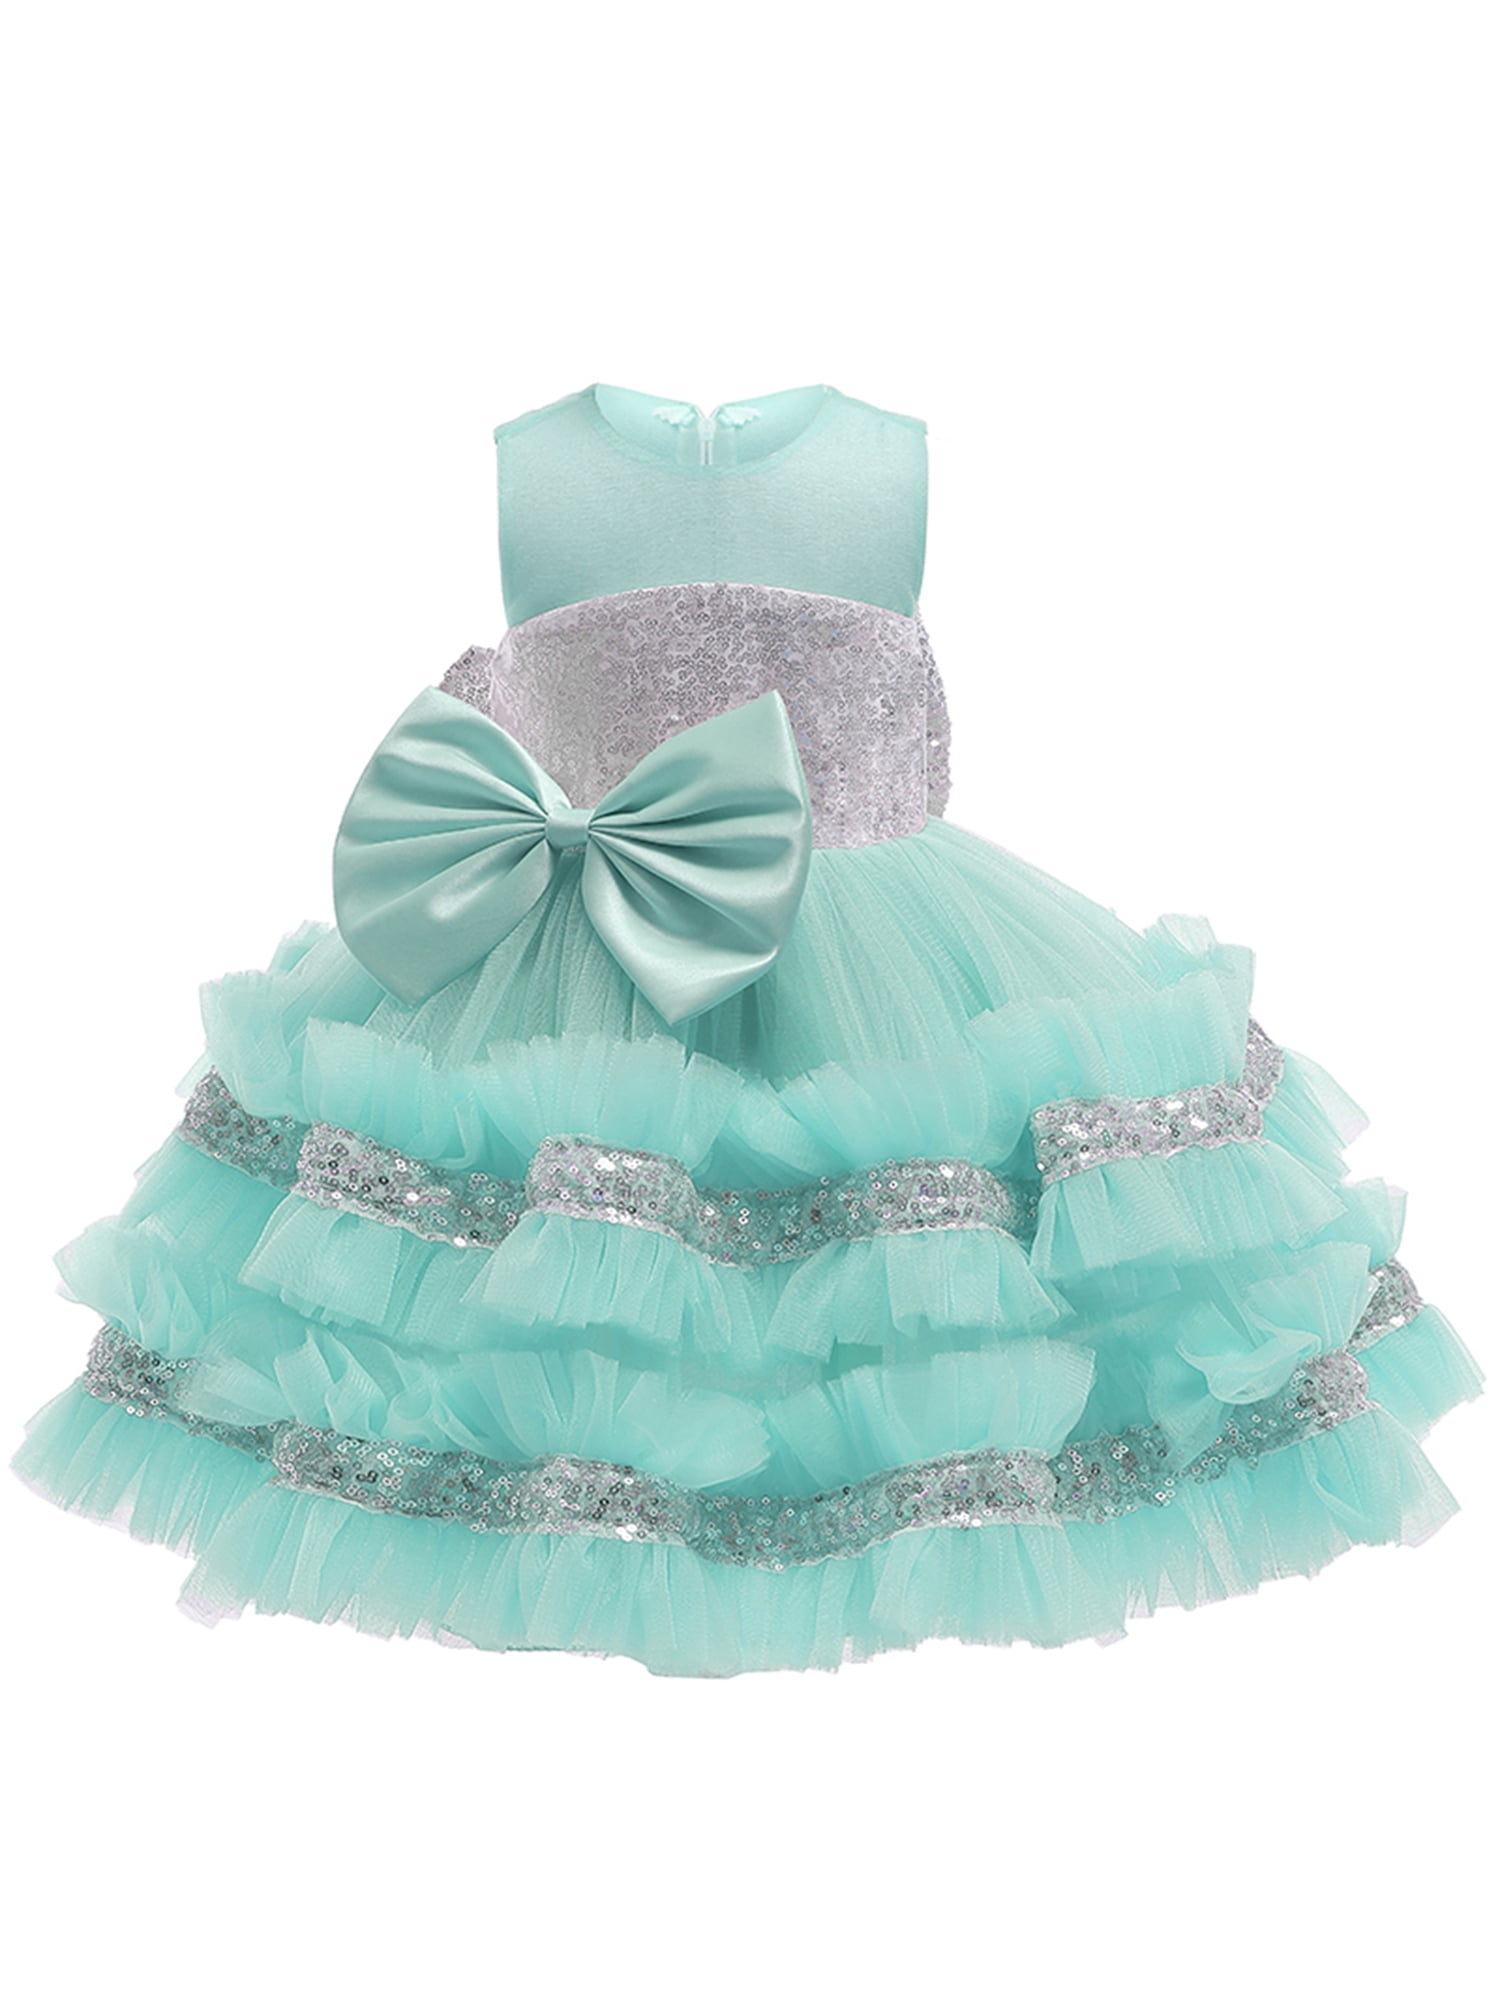 Mint Green Flower Girl Bridesmaid Prom Christening Xmas Party Dress 0-6m to 13y